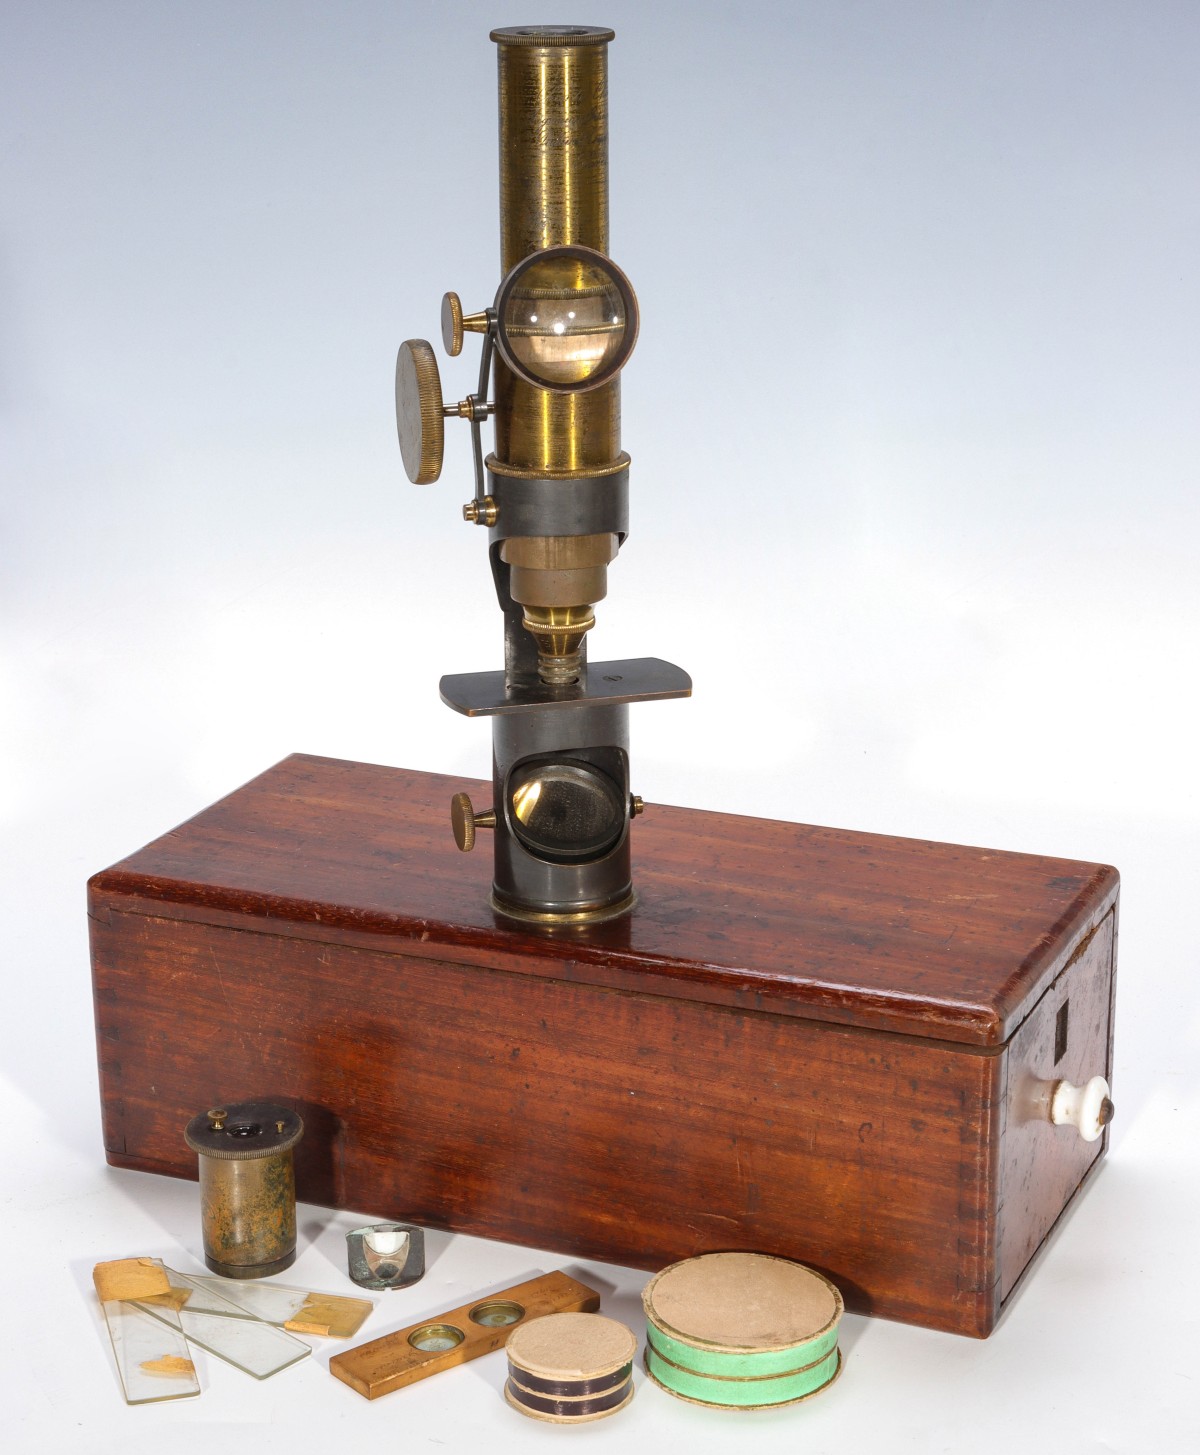 A MID 19TH C. CASE MOUNTED MICROSCOPE SIGNED CHEVALIER